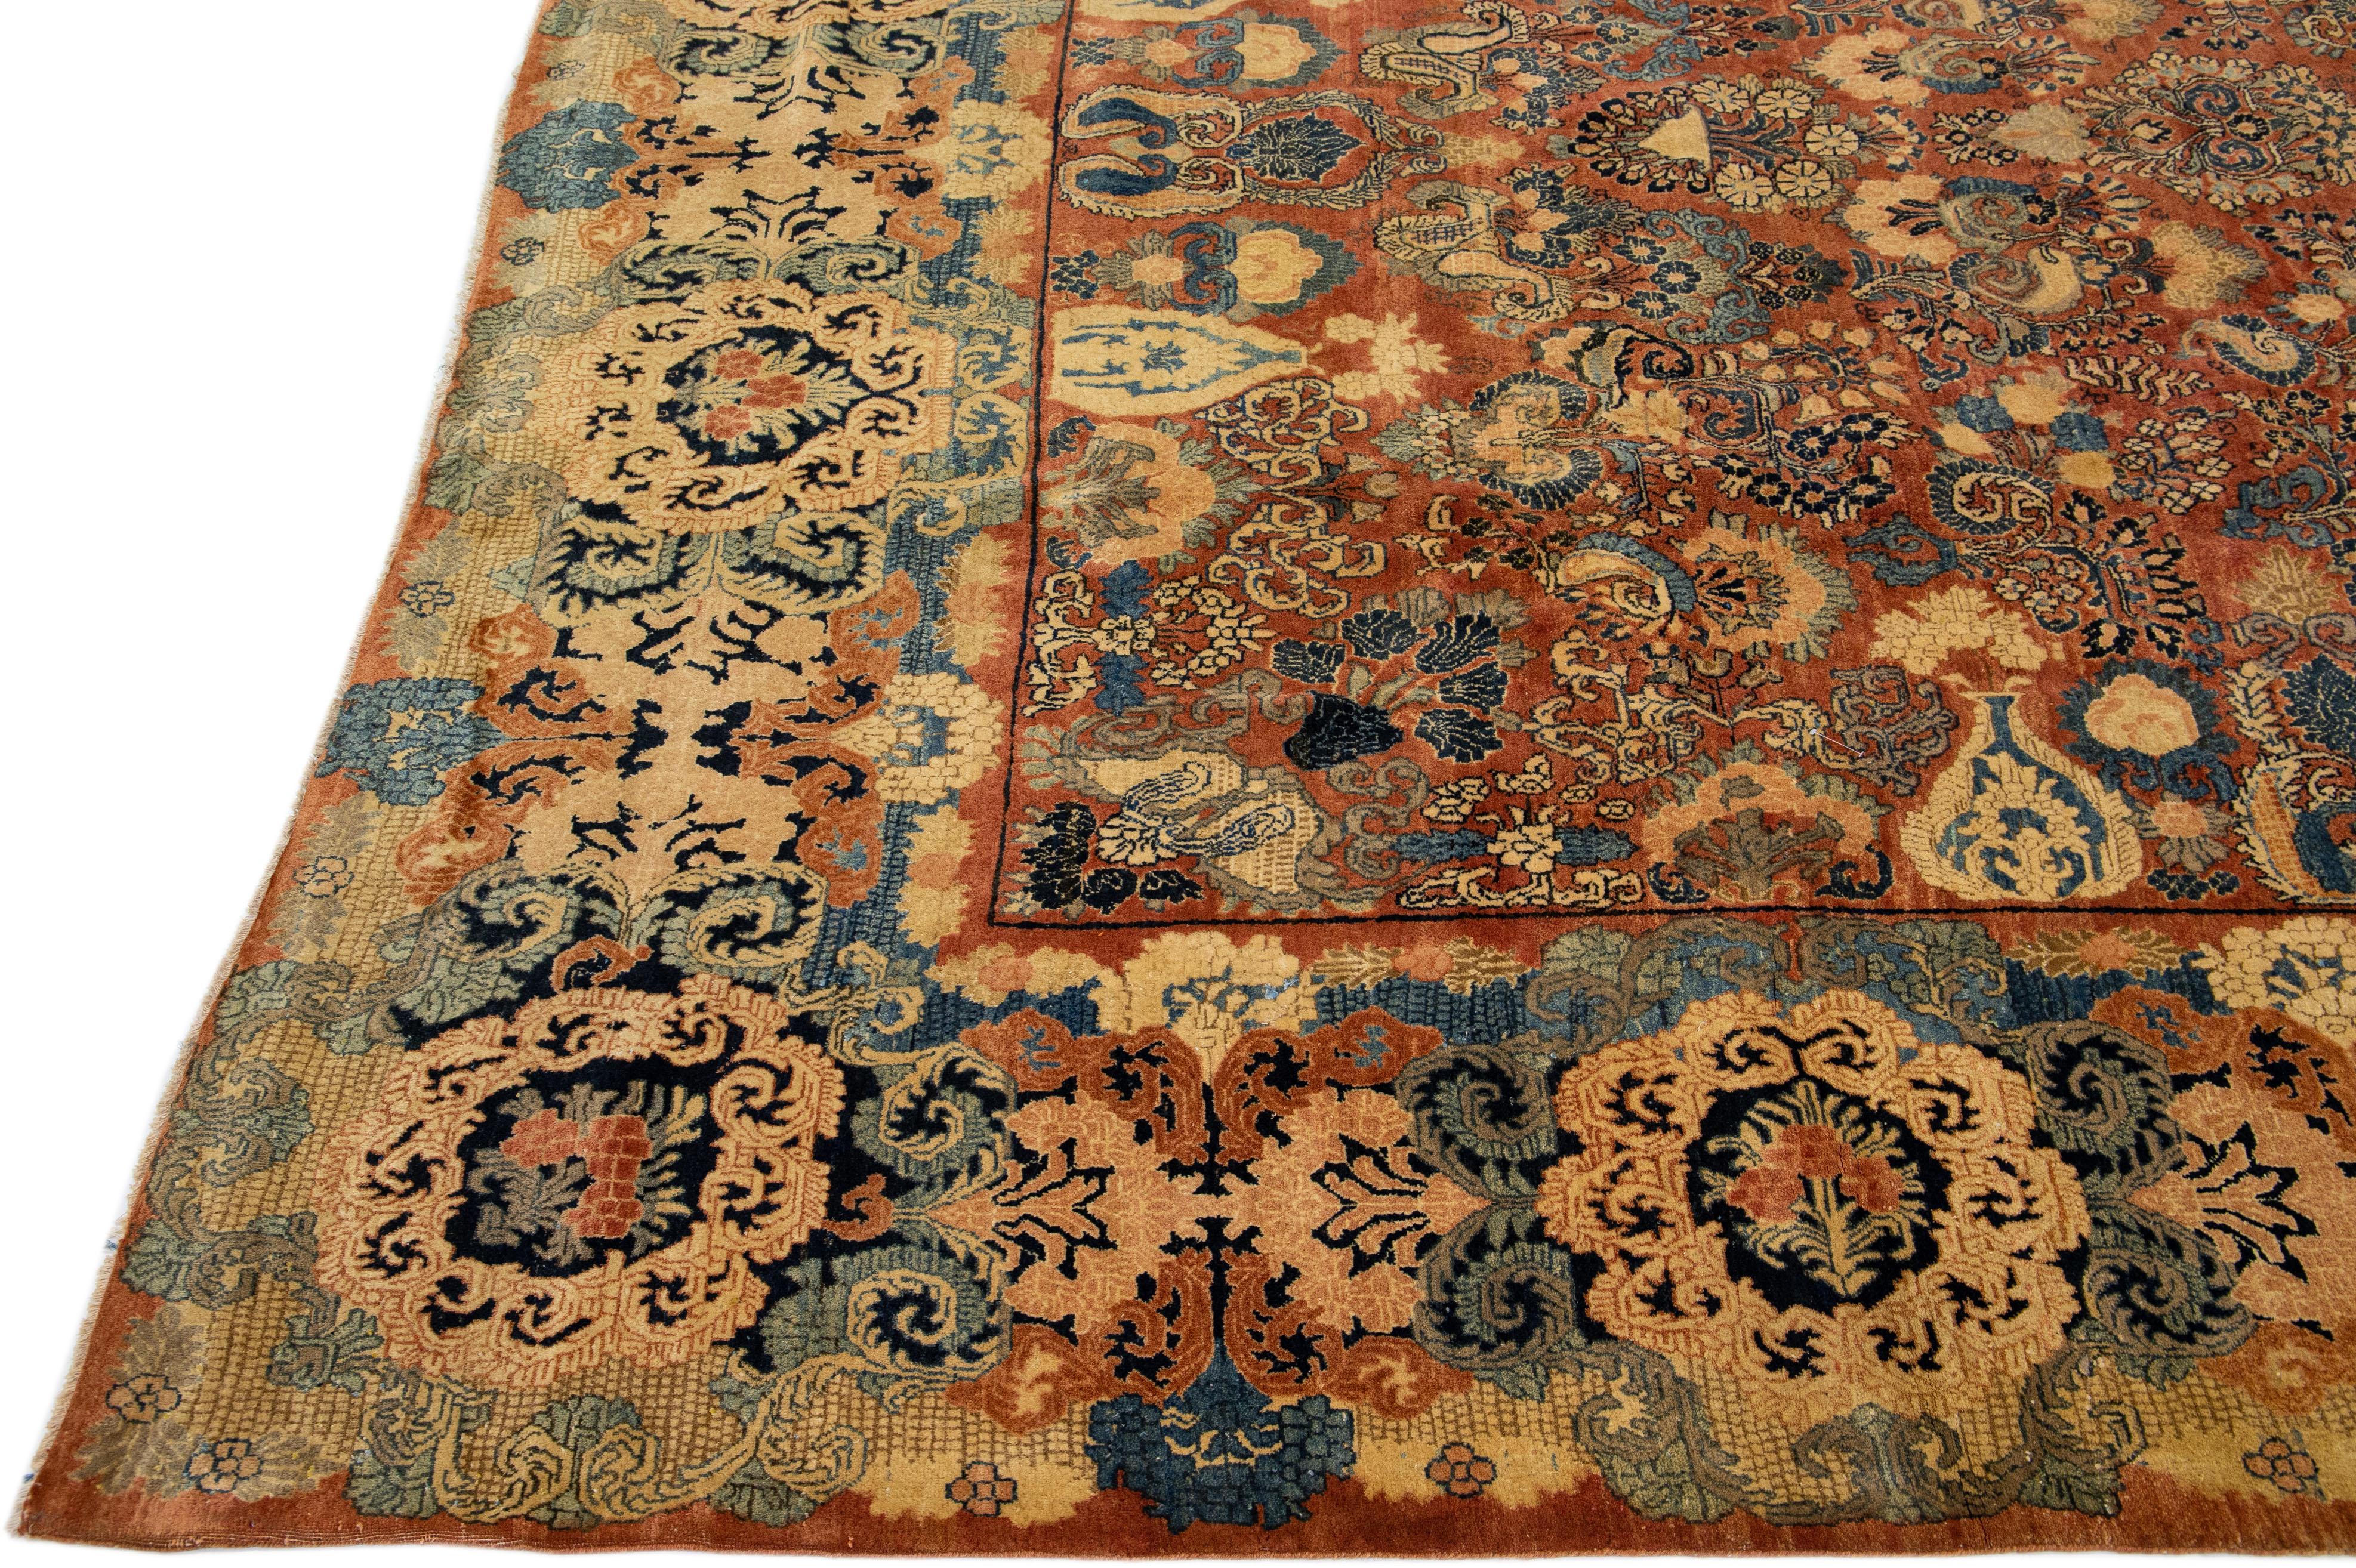 Antique Sarouk Farahan Orange Handmade Persian Wool Rug with Allover Motif In Good Condition For Sale In Norwalk, CT